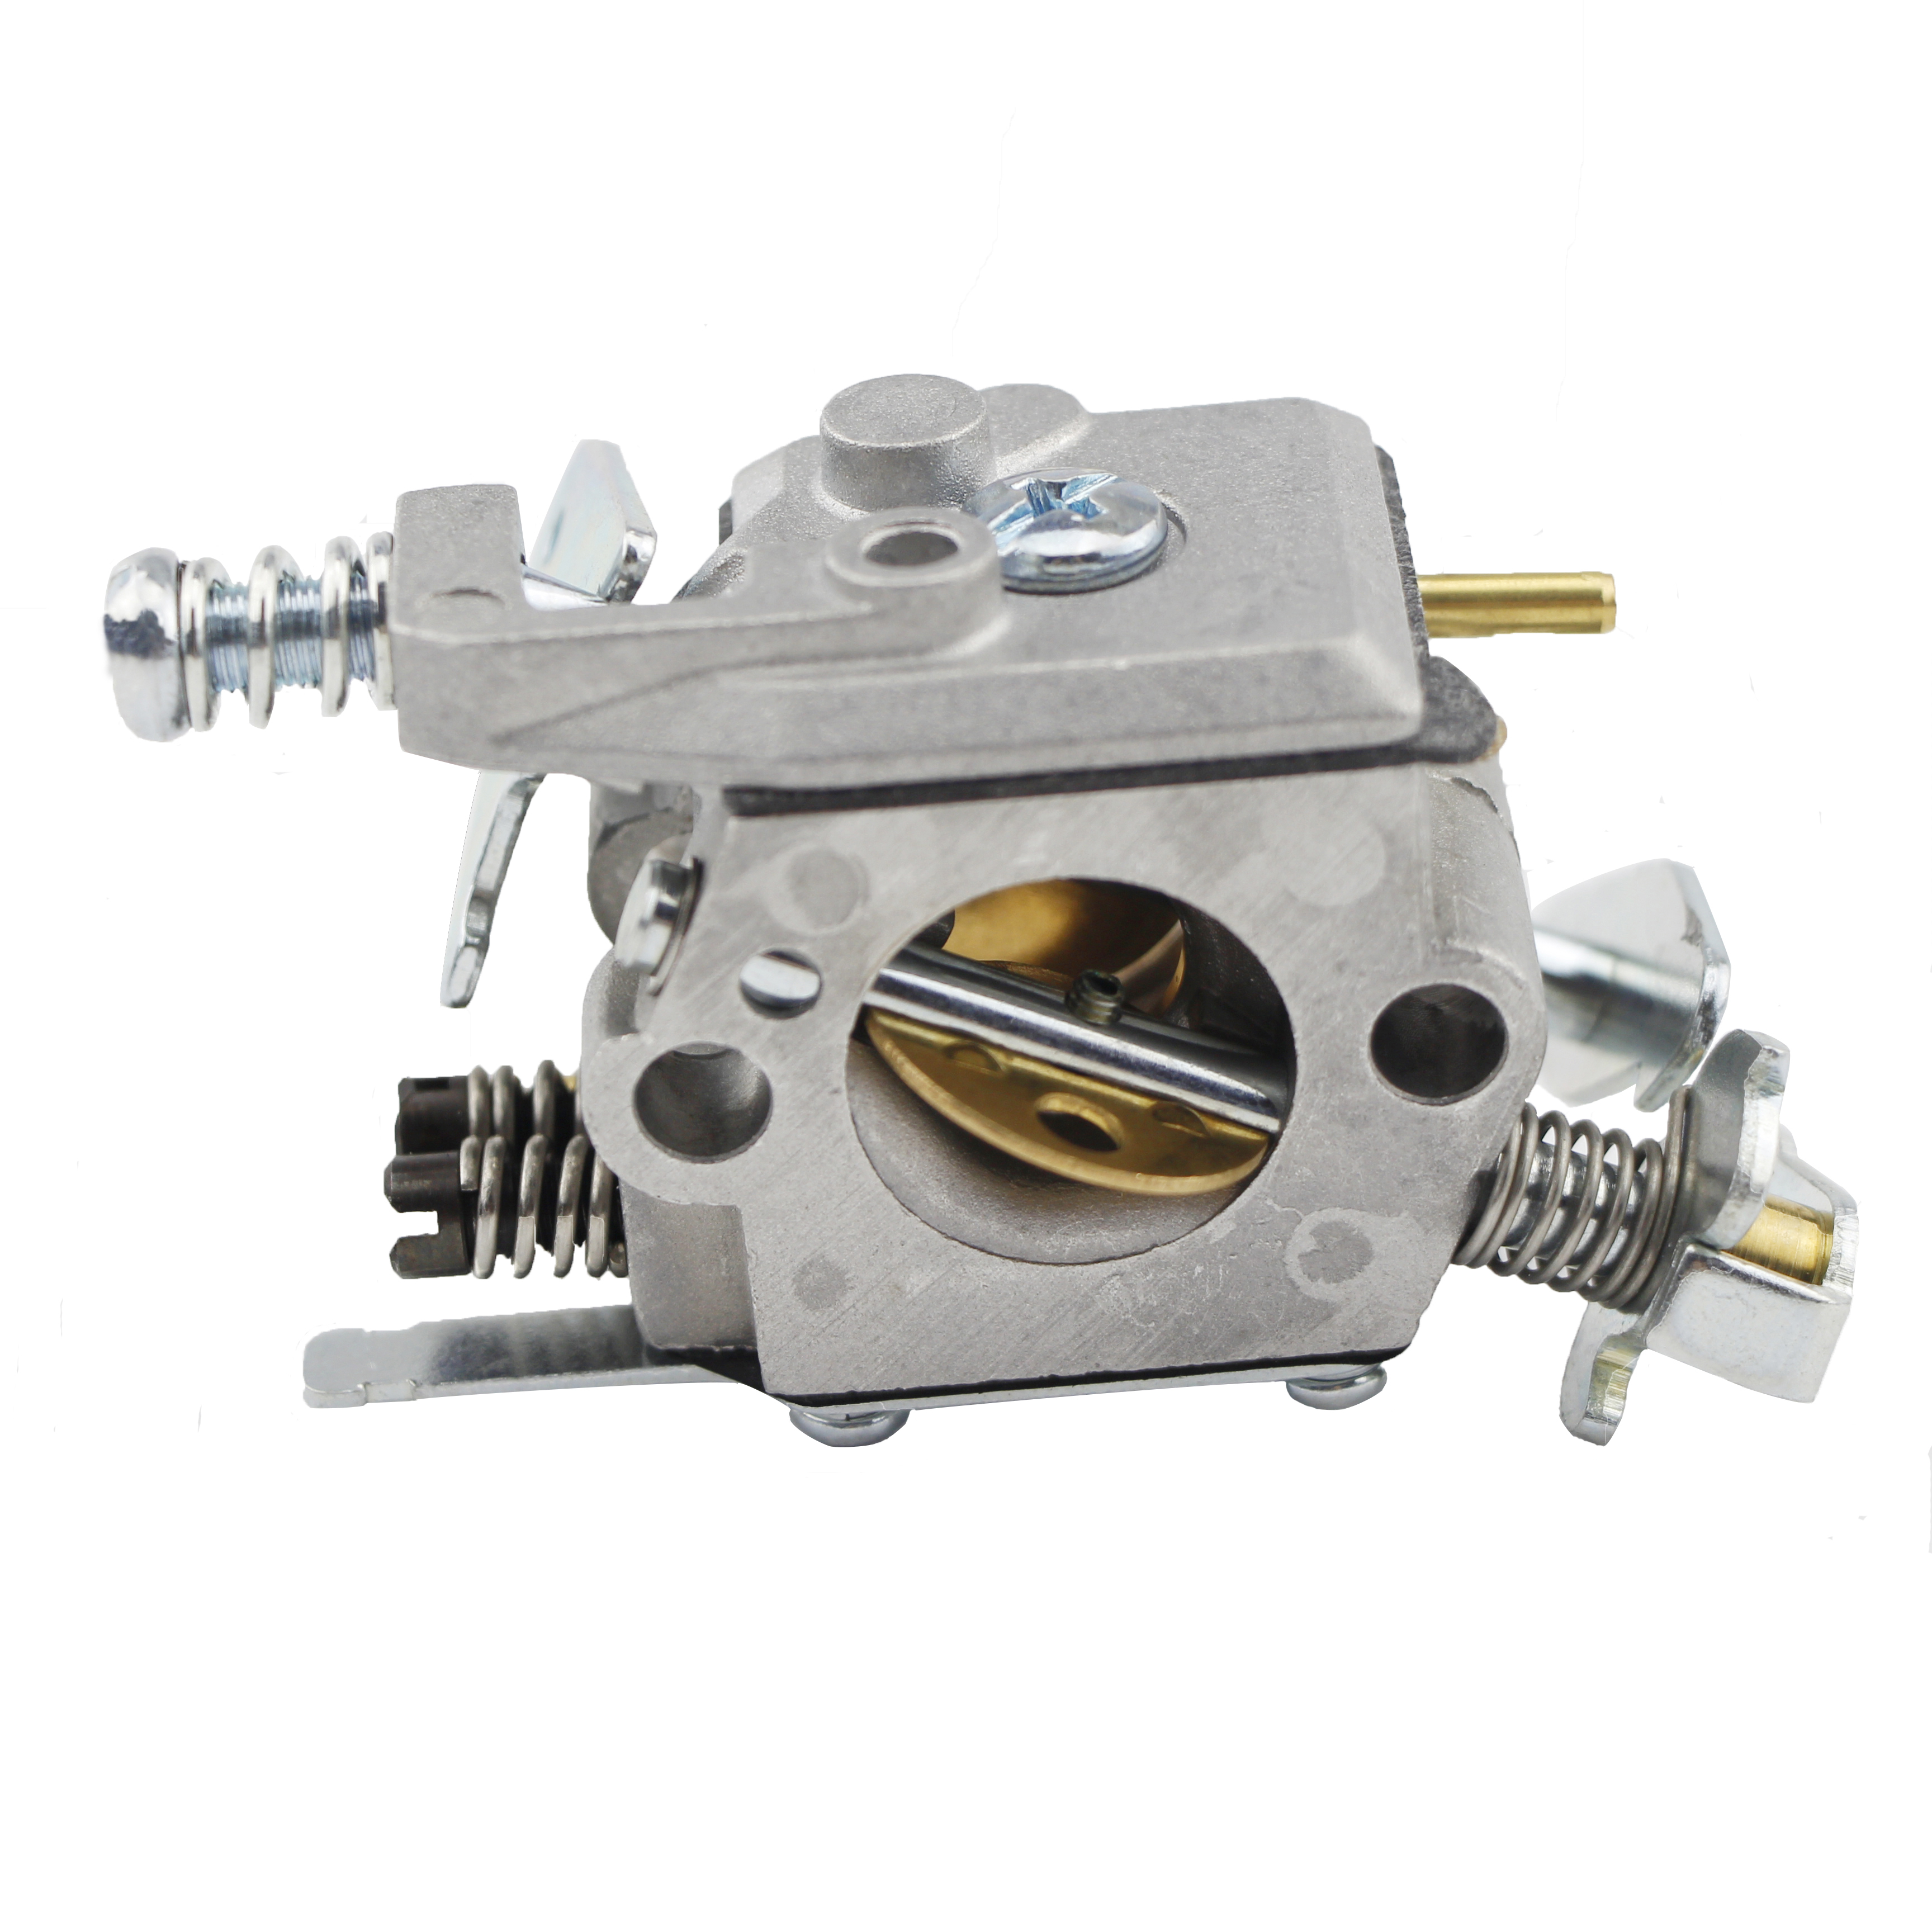 Carburetor For Husqvarna Partner 350 351 370 420 Chainsaw and Compatible With Walbro 33-29 Carb